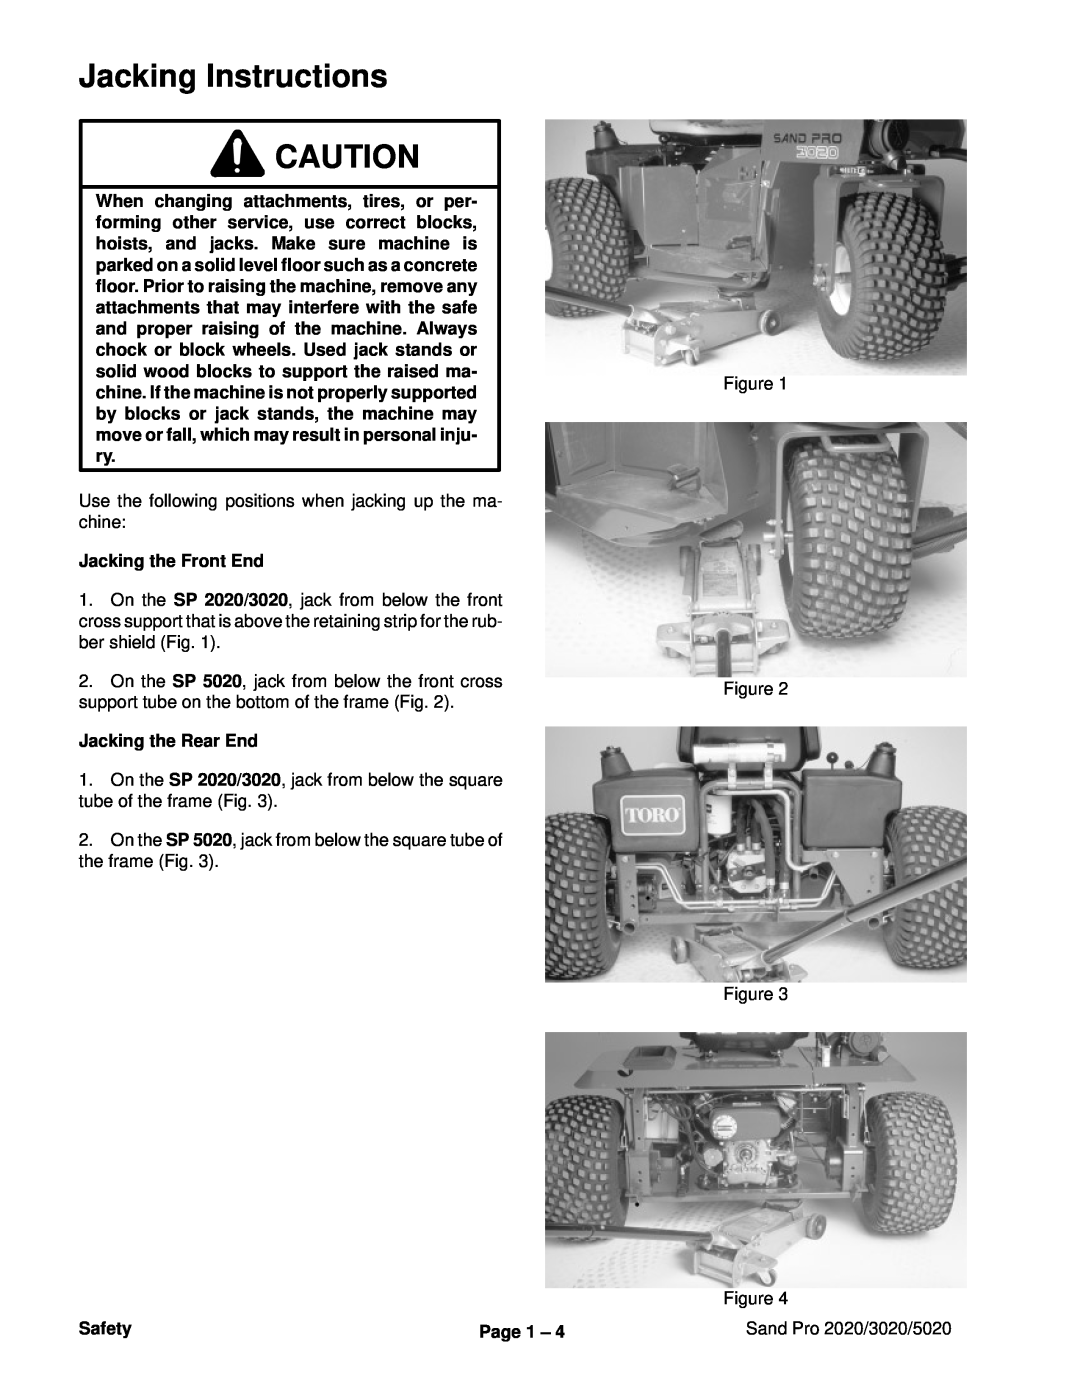 Toro 3020, 5020, 2020 service manual Jacking Instructions, Jacking the Front End, Jacking the Rear End, Safety, Page 1 